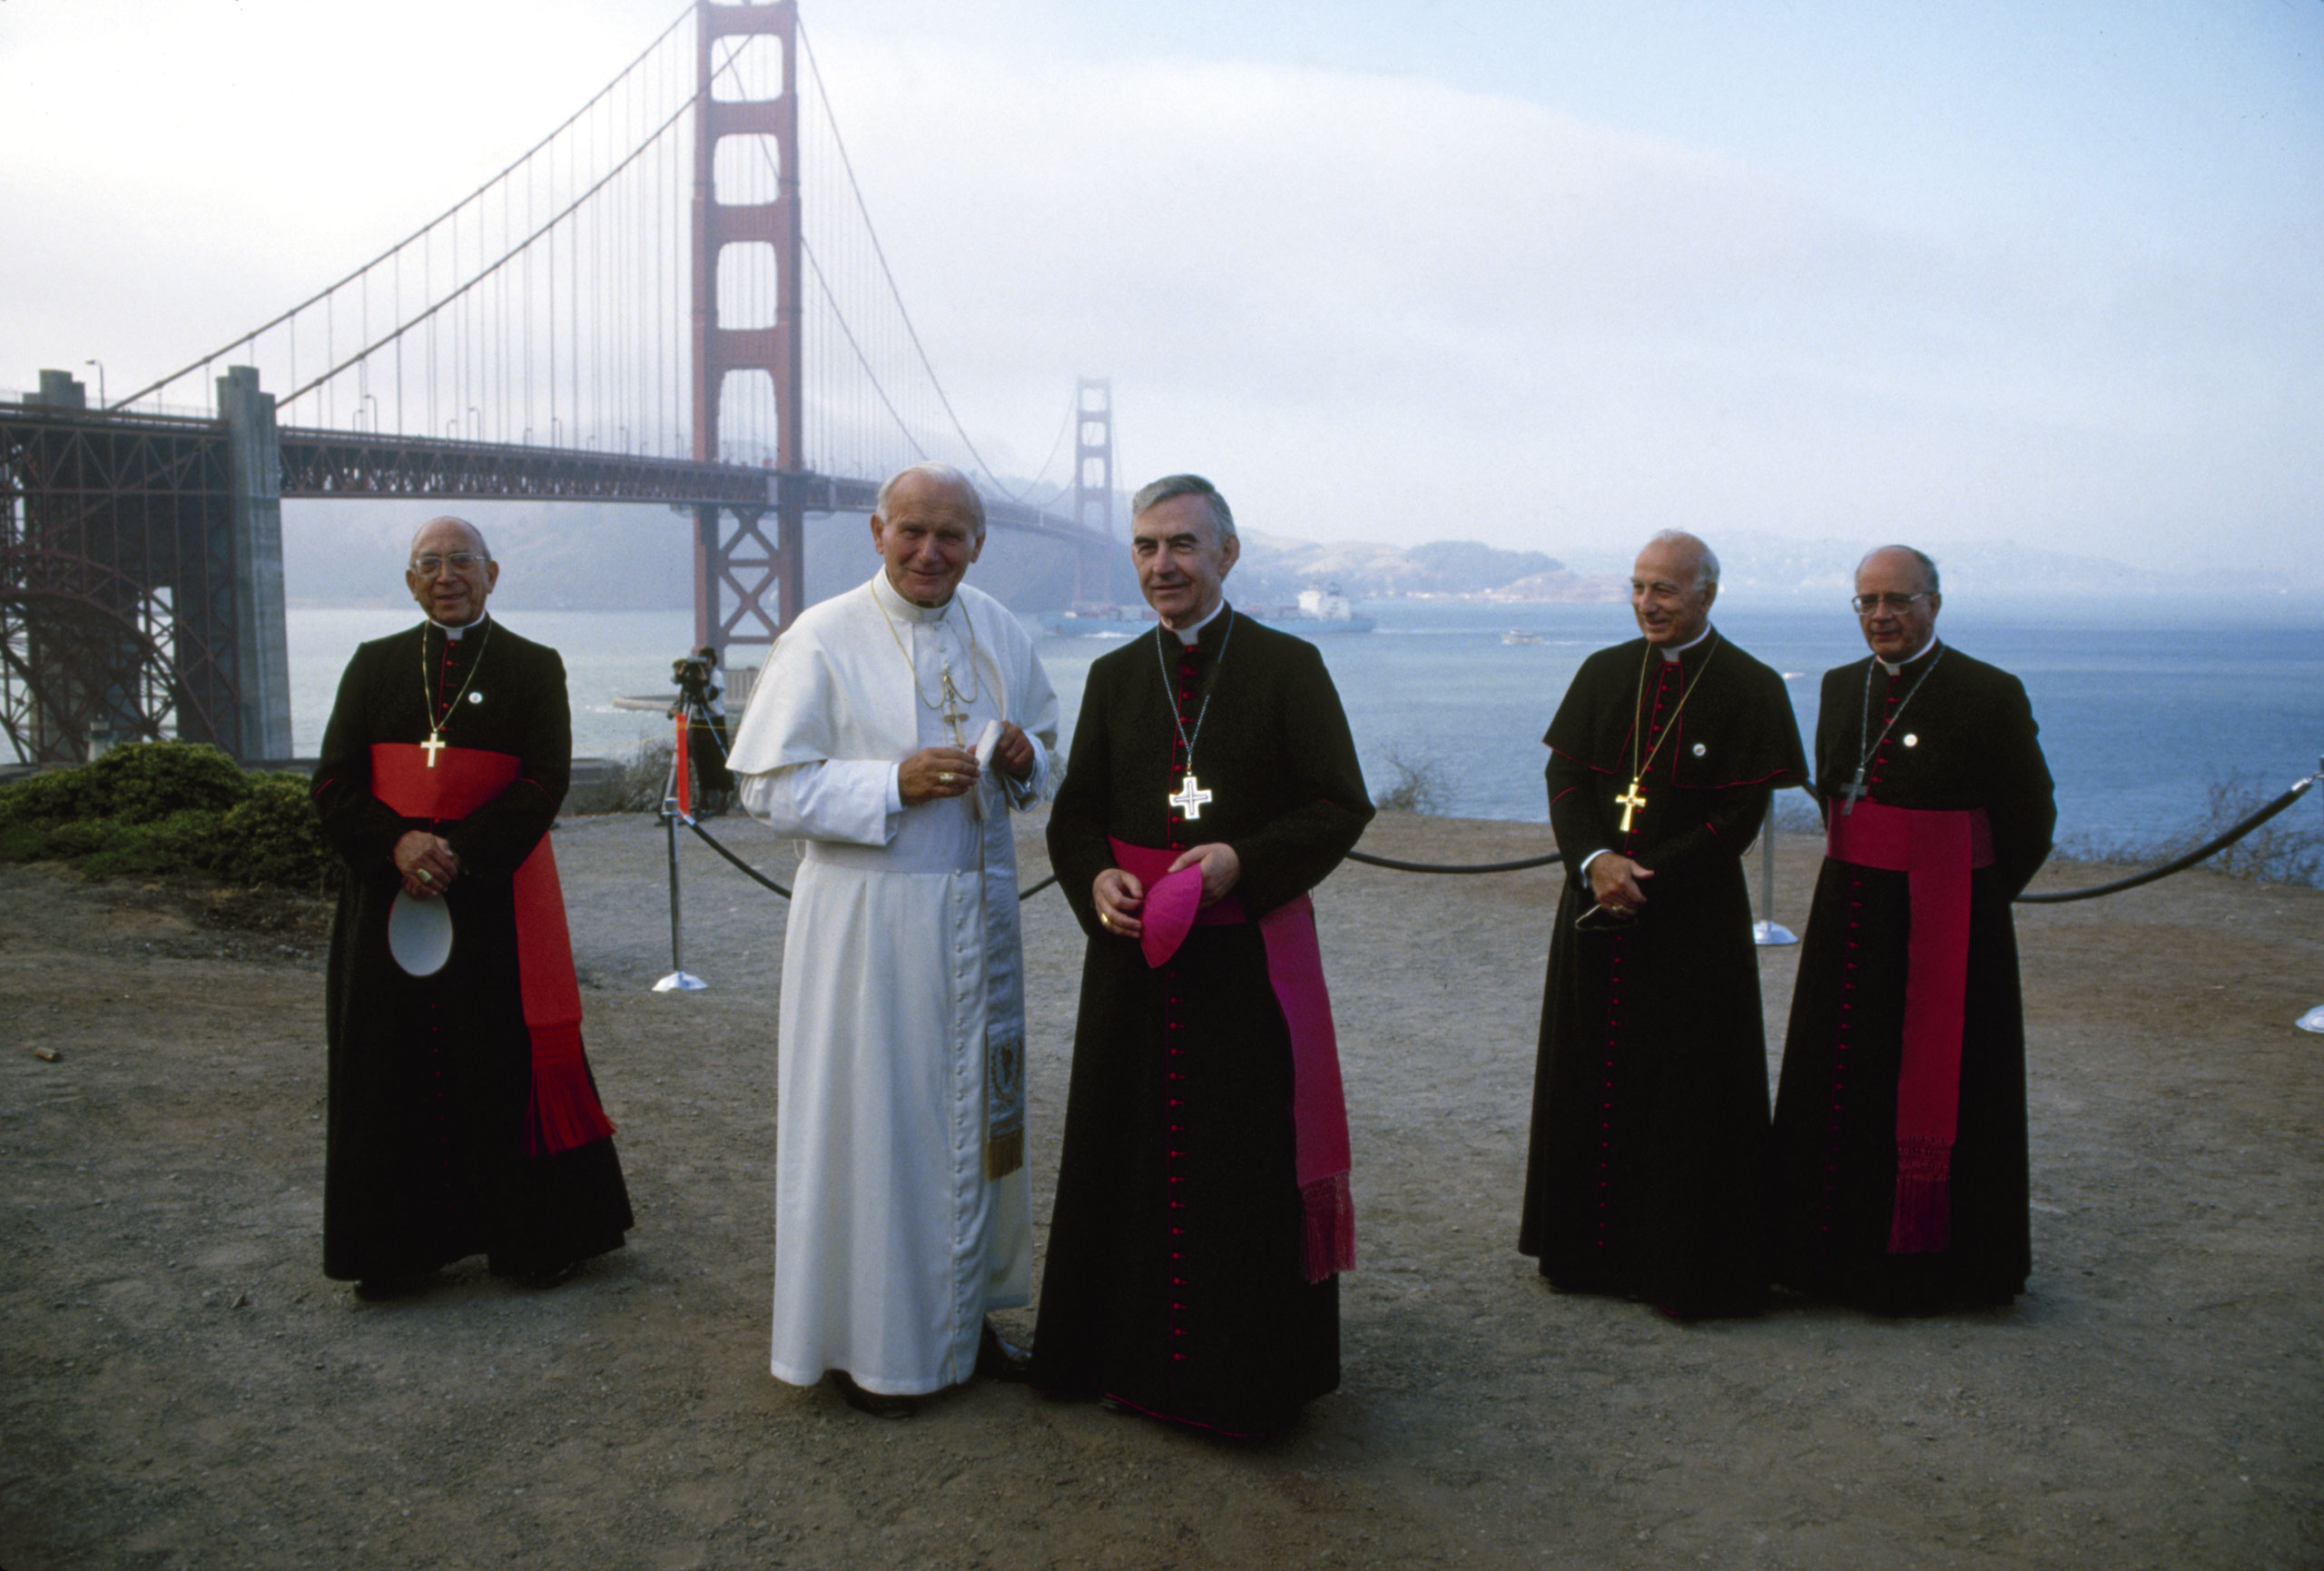 Pope John Paul II poses with American Bishop (and later Archibishop) John R. Quinn (center) during a visit to Golden Gate National Recreation Area, San Francisco, Sept. 18, 1987. With them in the background are Italian Cardinal Secretary of State Agostino Casaroli (left), Italian Apostolic Pro-Nuncio to the United States (and later Cardinal) Pio Laghi (second right), and Spanish Archbishop Substitute for General Affairs (and later Cardinal) Eduardo Martinez Somalo (right).